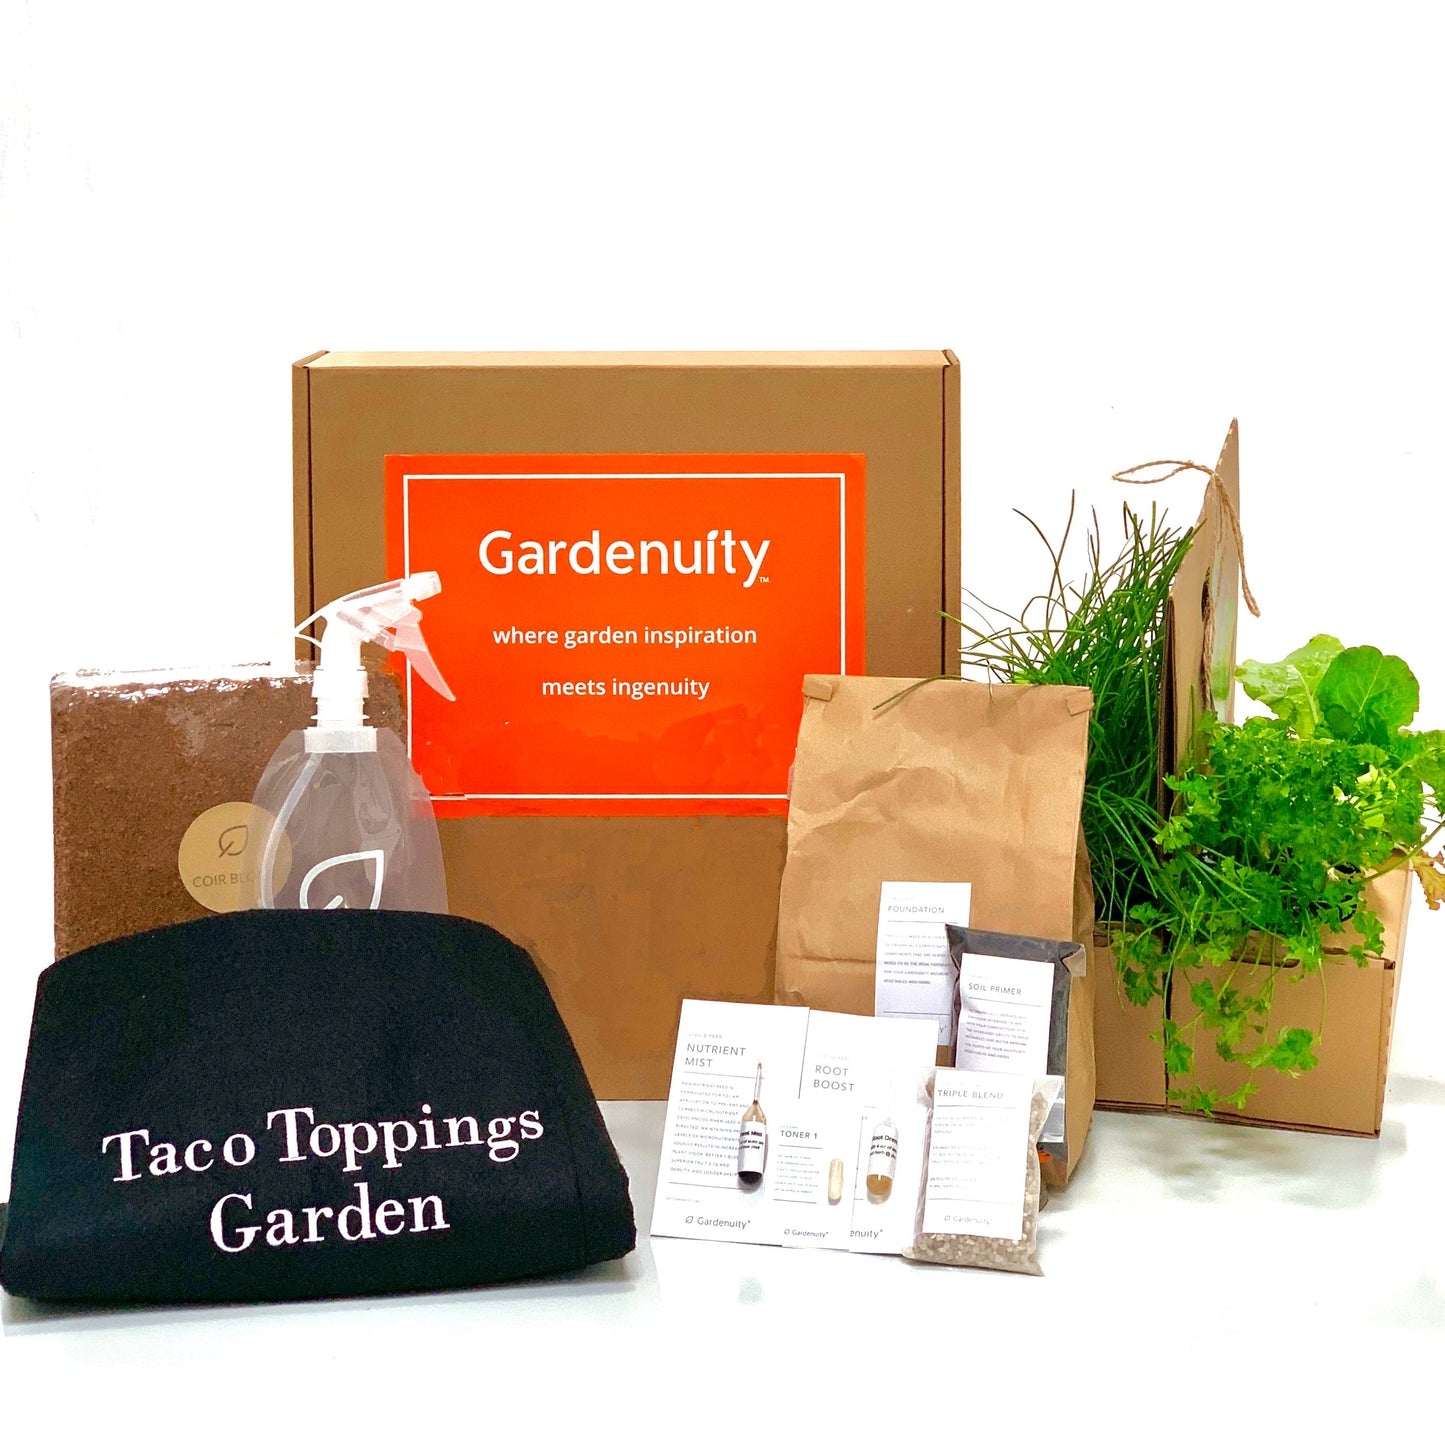 Taco Toppings Garden Kit‎ with leafy greens + herbs